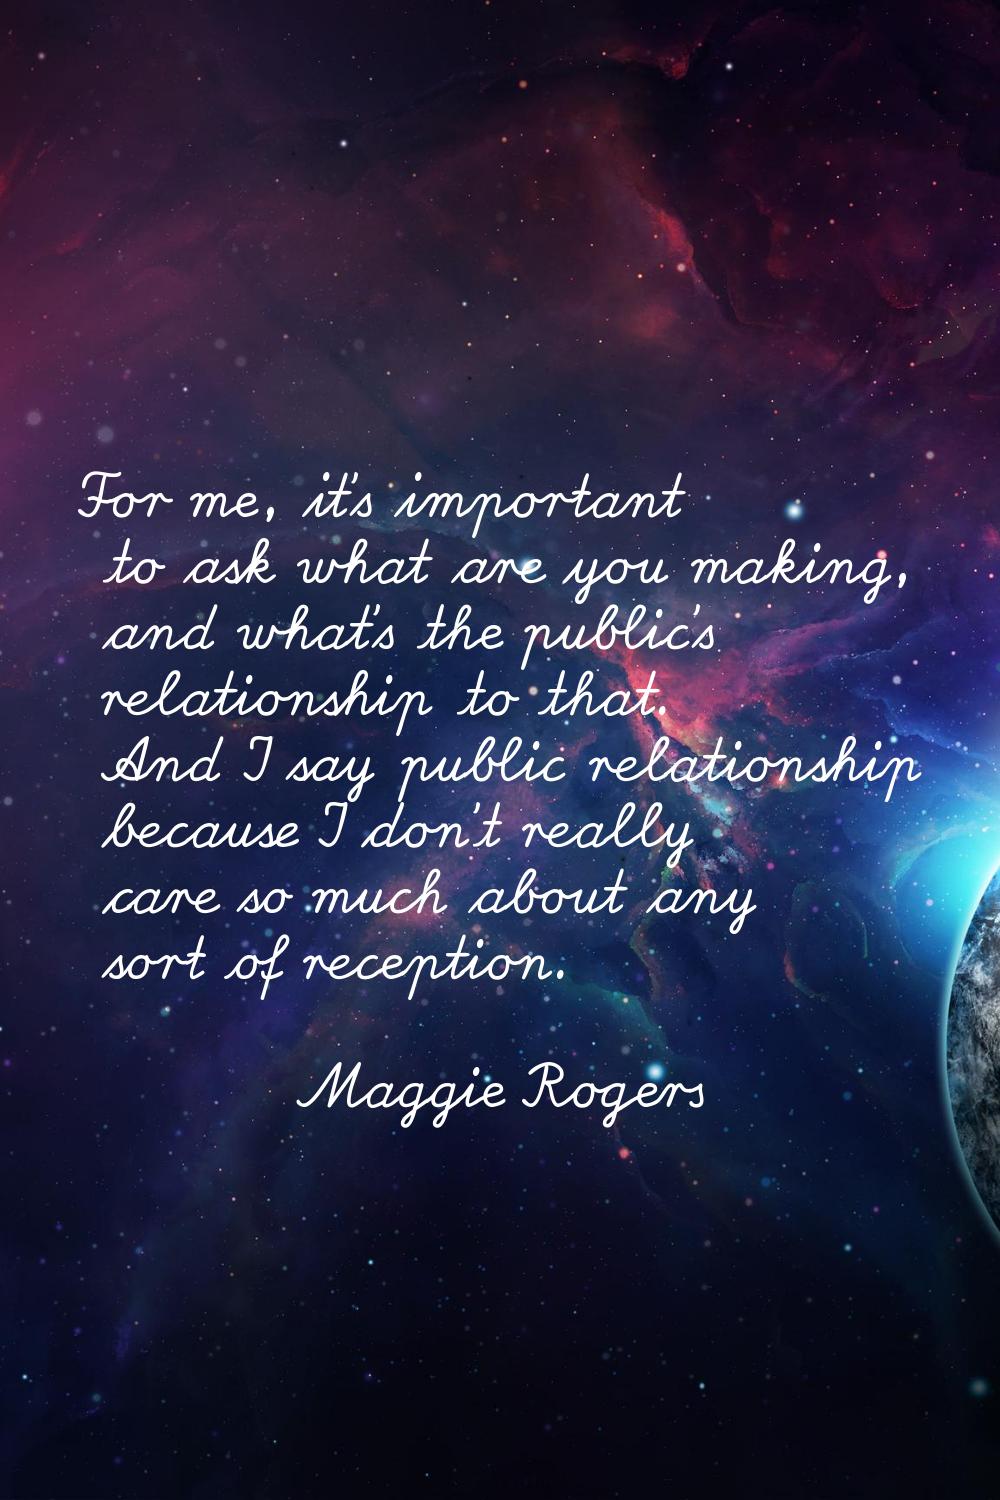 For me, it's important to ask what are you making, and what's the public's relationship to that. An